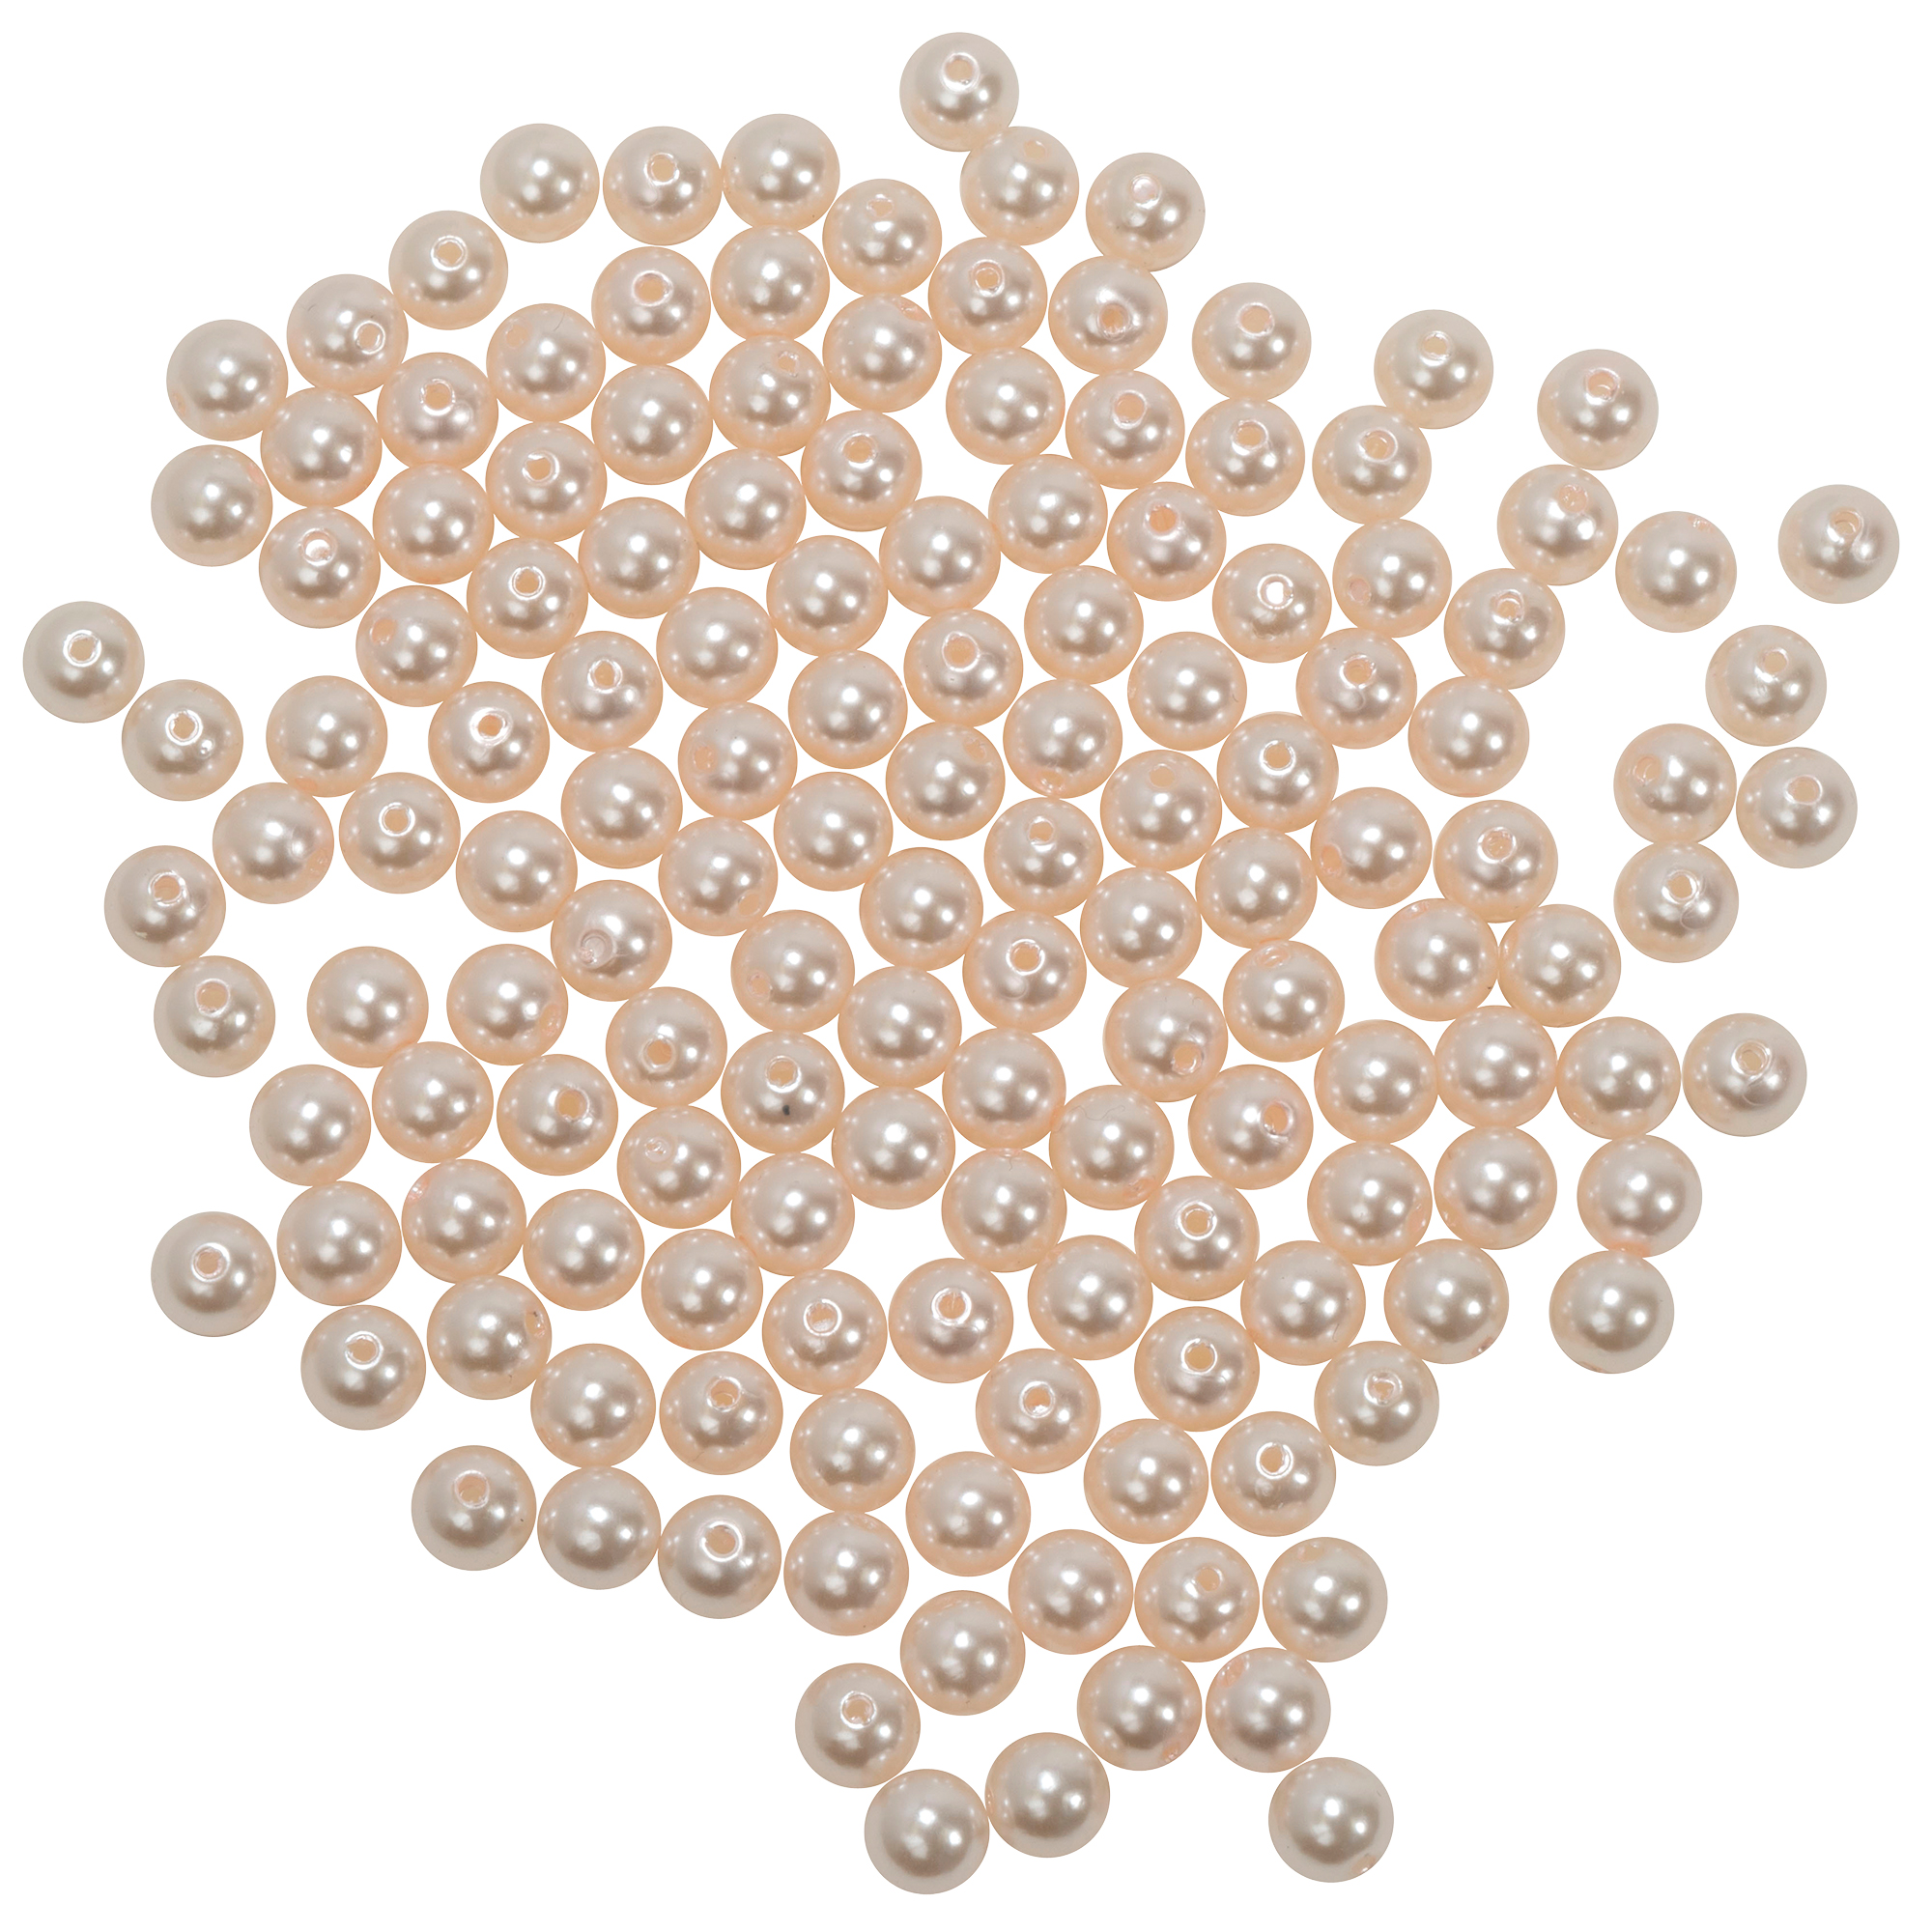 10mm Craft Pearl Beads With Hole 454g/Bag - Blush